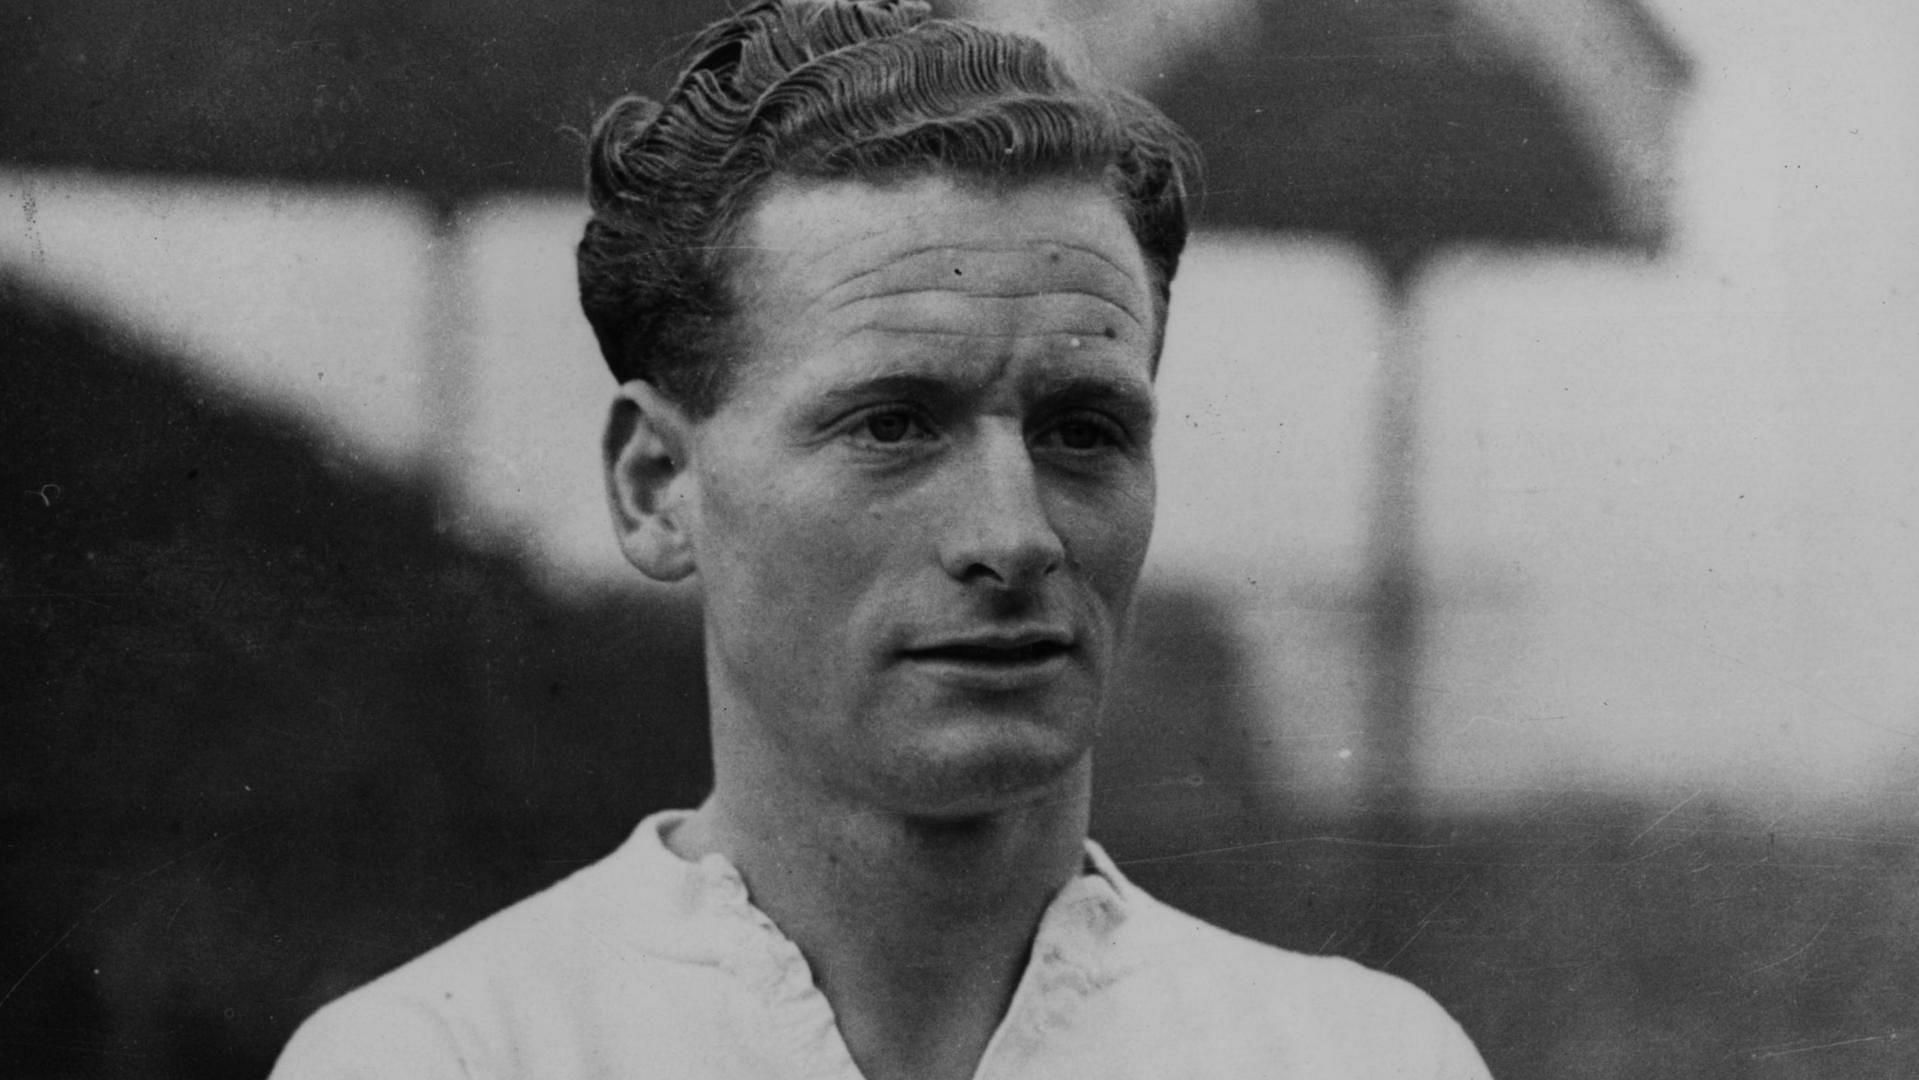 Sir Tom Finney received knighthood in 1998 for his charitable work.